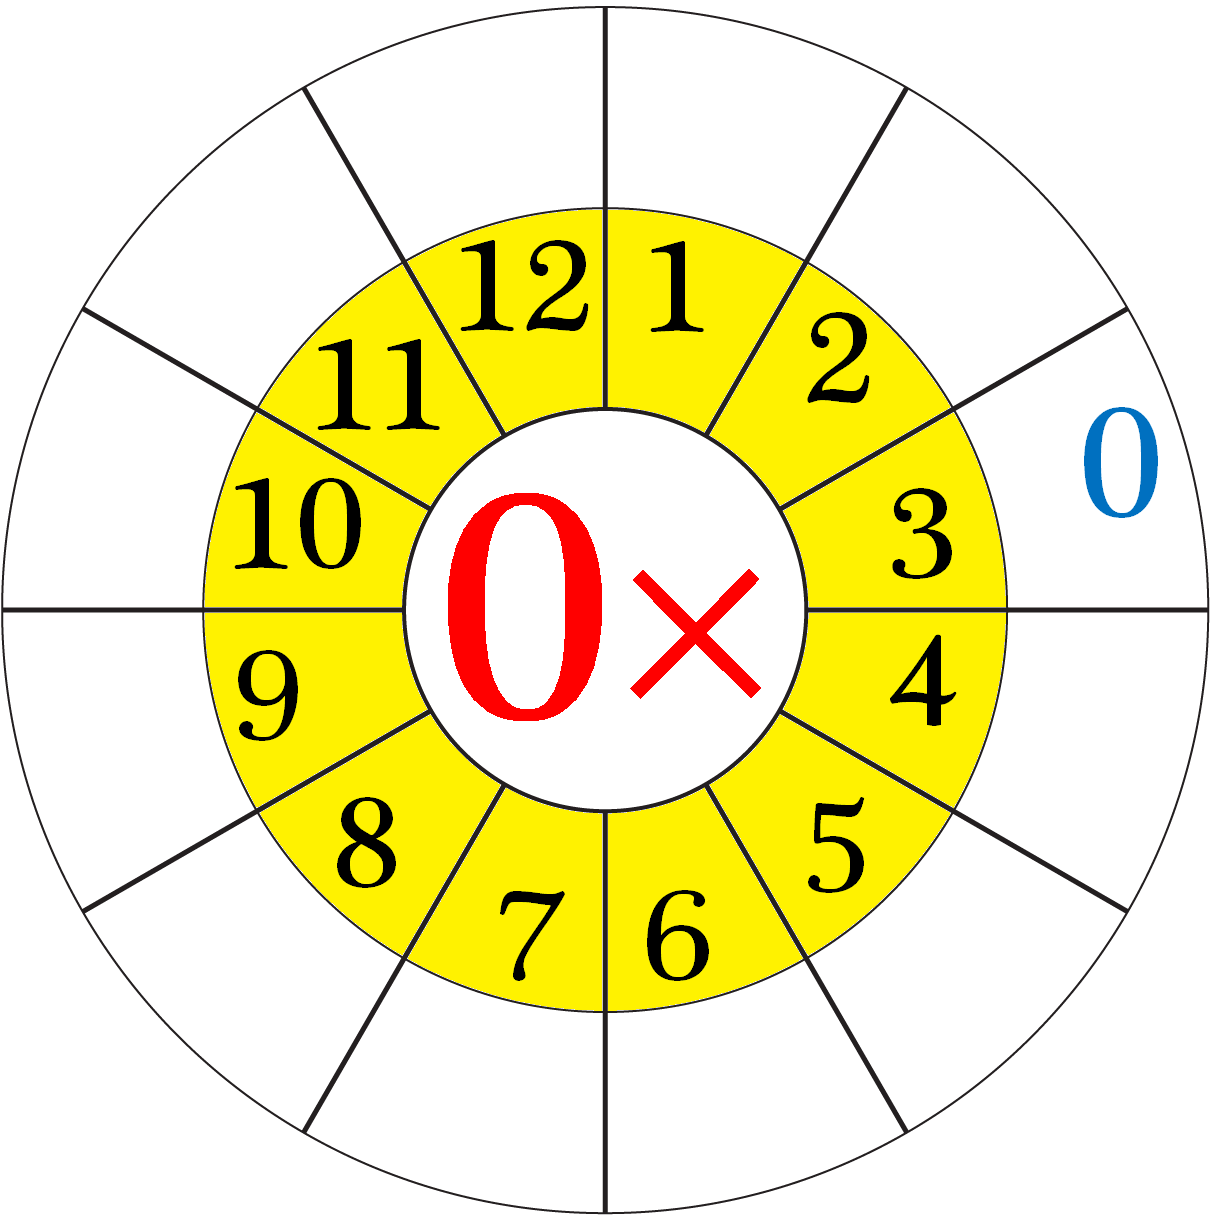 Multiplication Table of 0